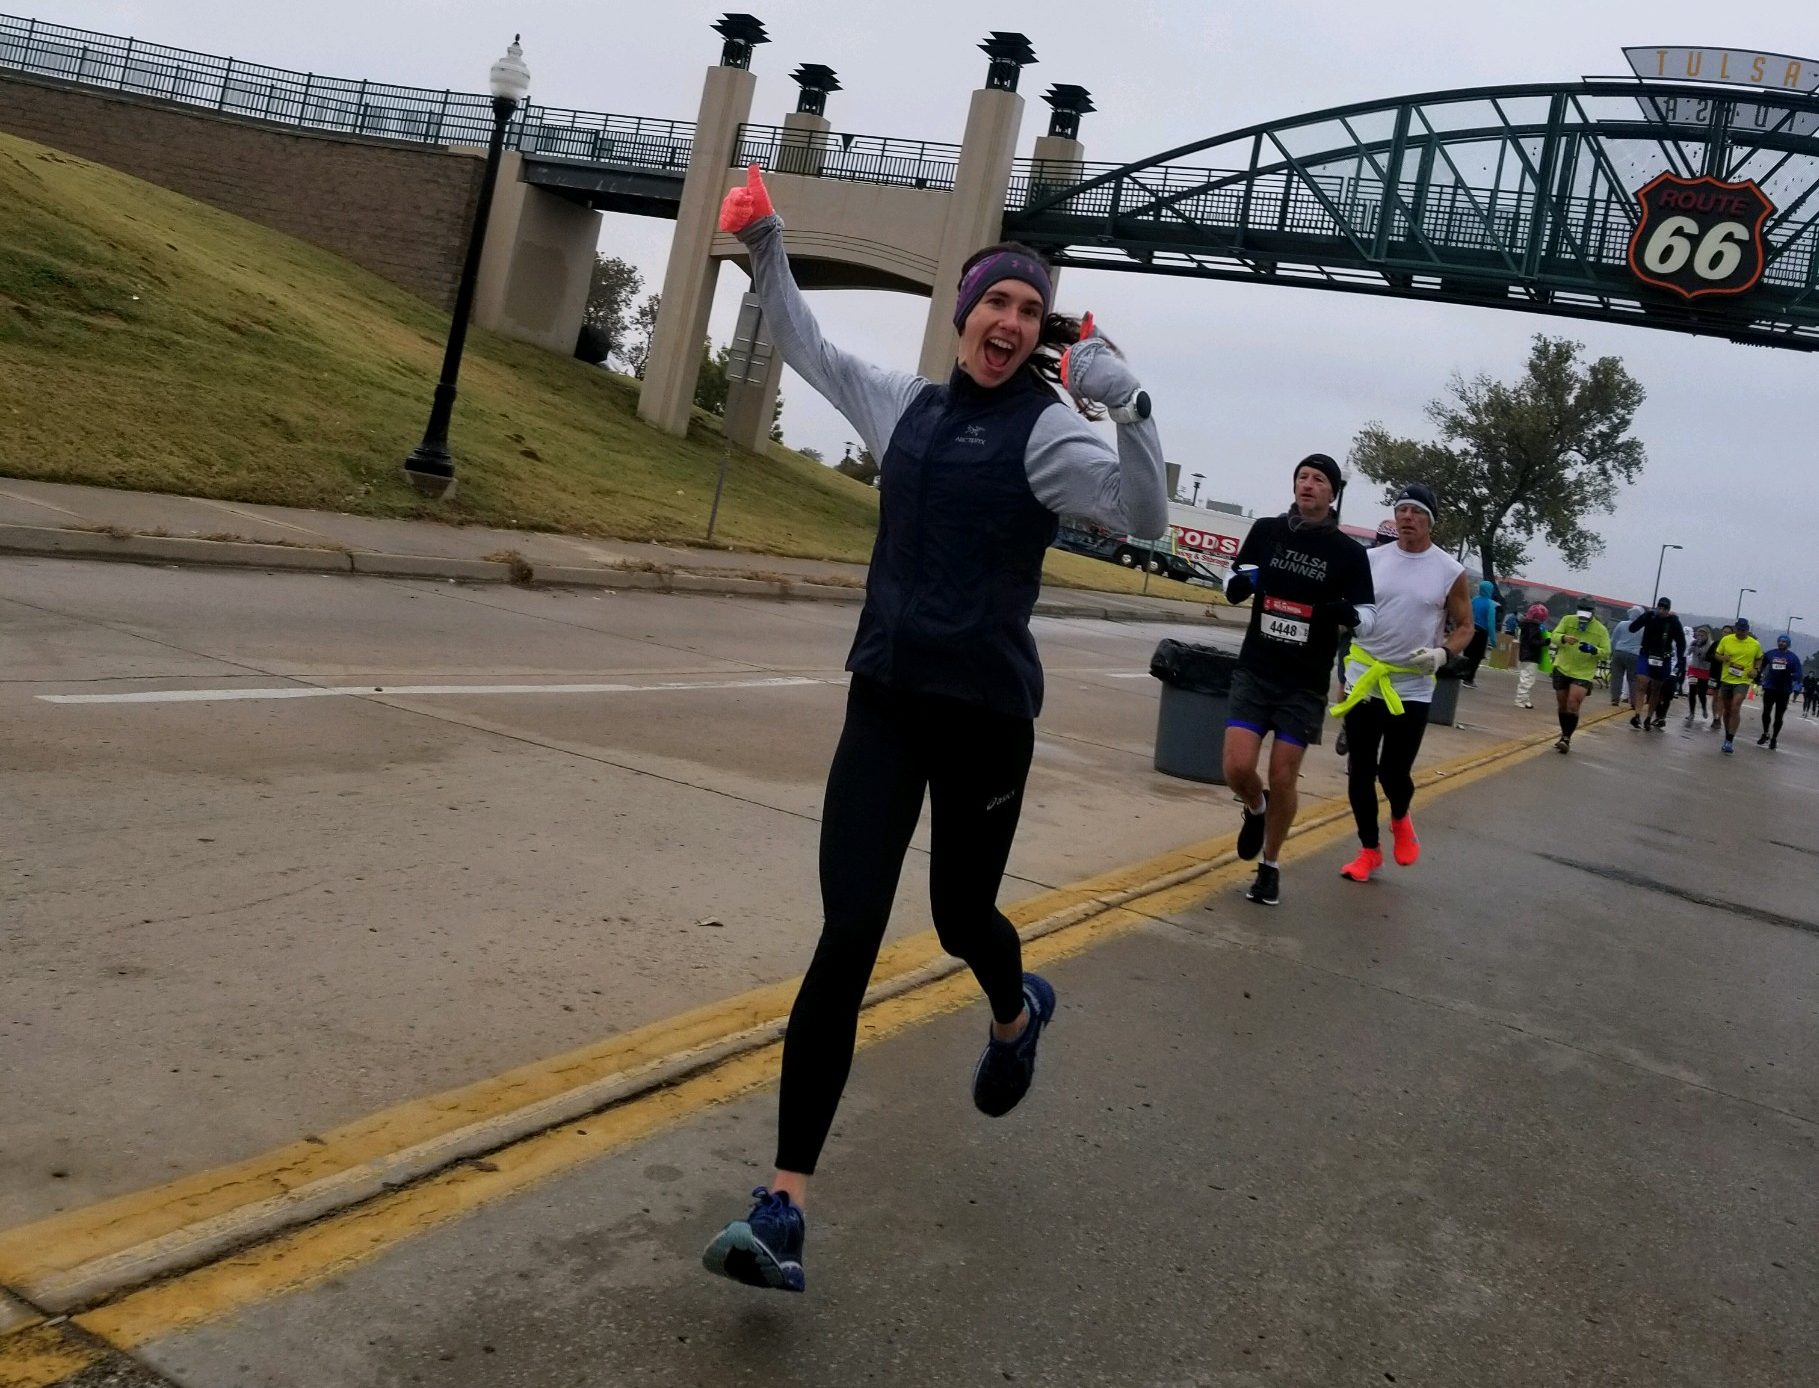 Throwing my hands up in excitement about how well my second marathon was going despite less-than ideal conditions.